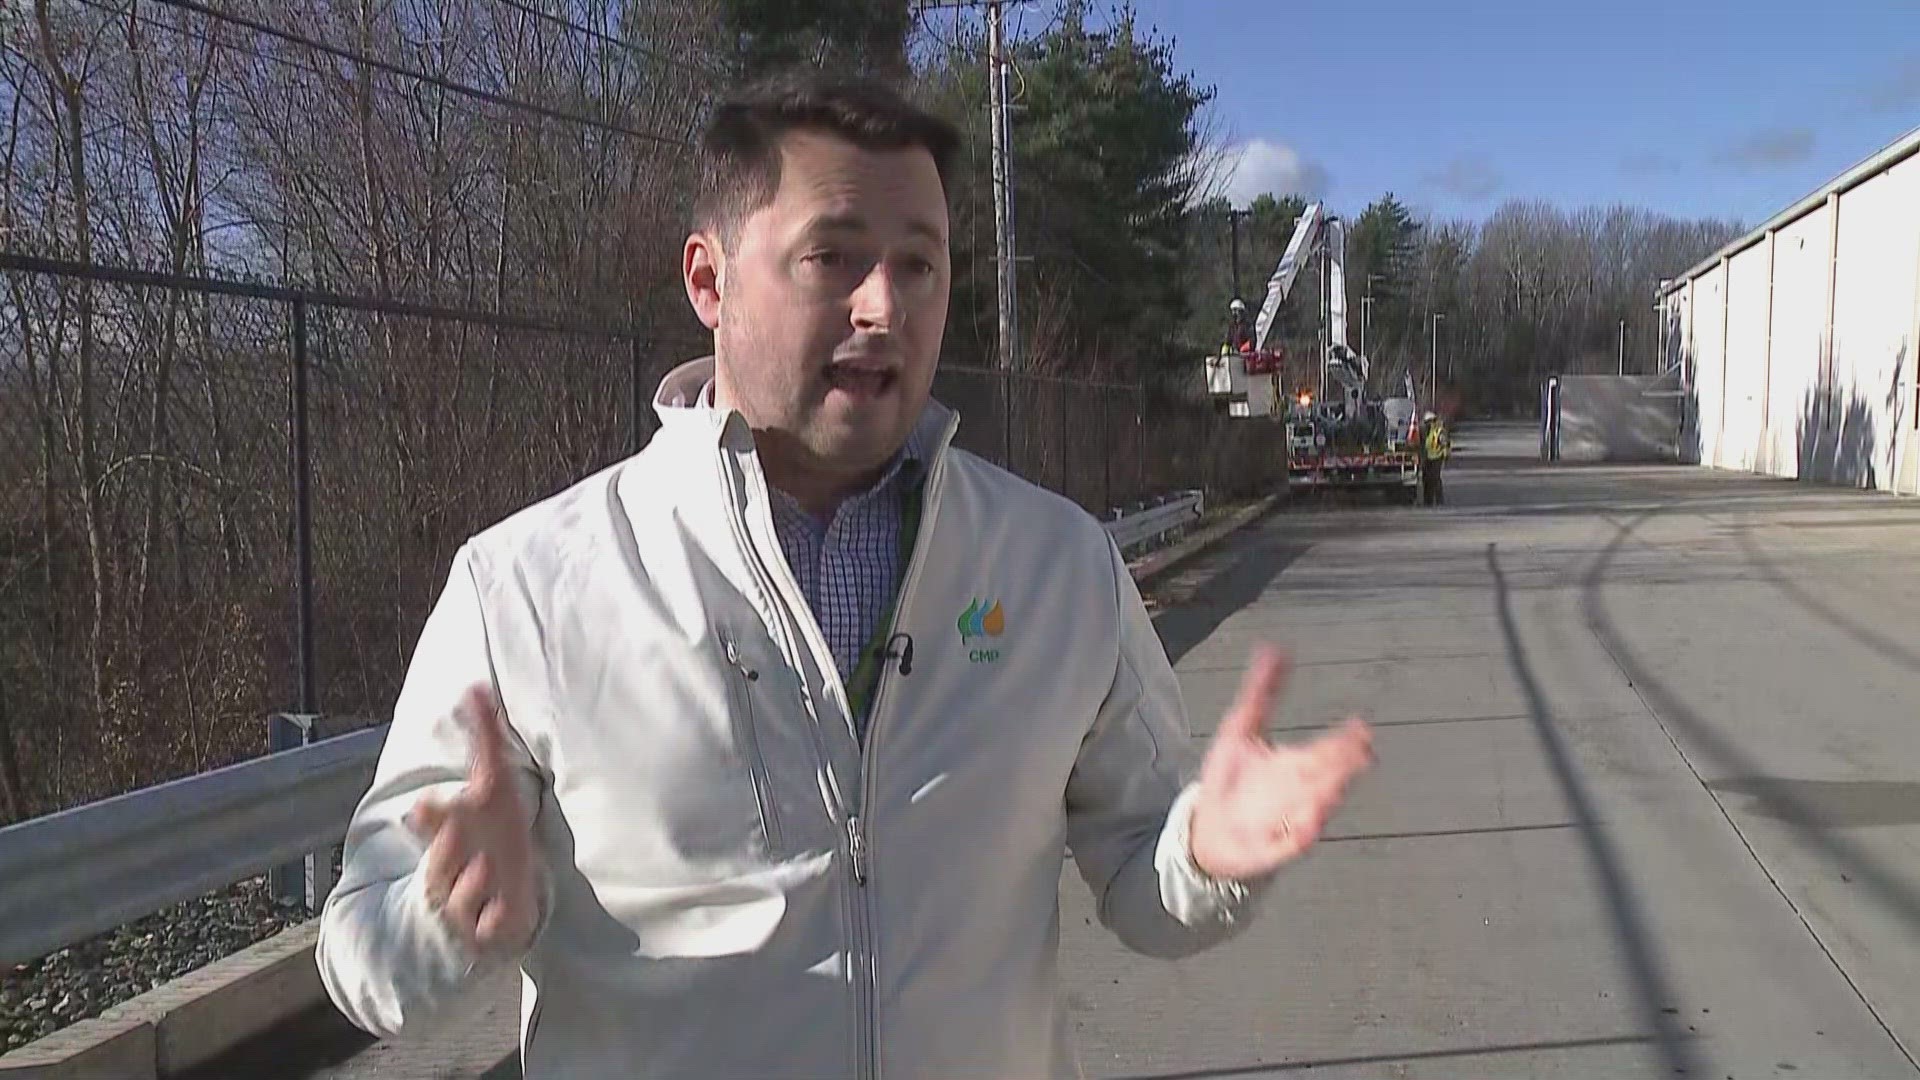 Central Maine Power spokesperson Jon Breed said the company is still working to assess damage, and hundreds of crews are deployed to help with restorations.